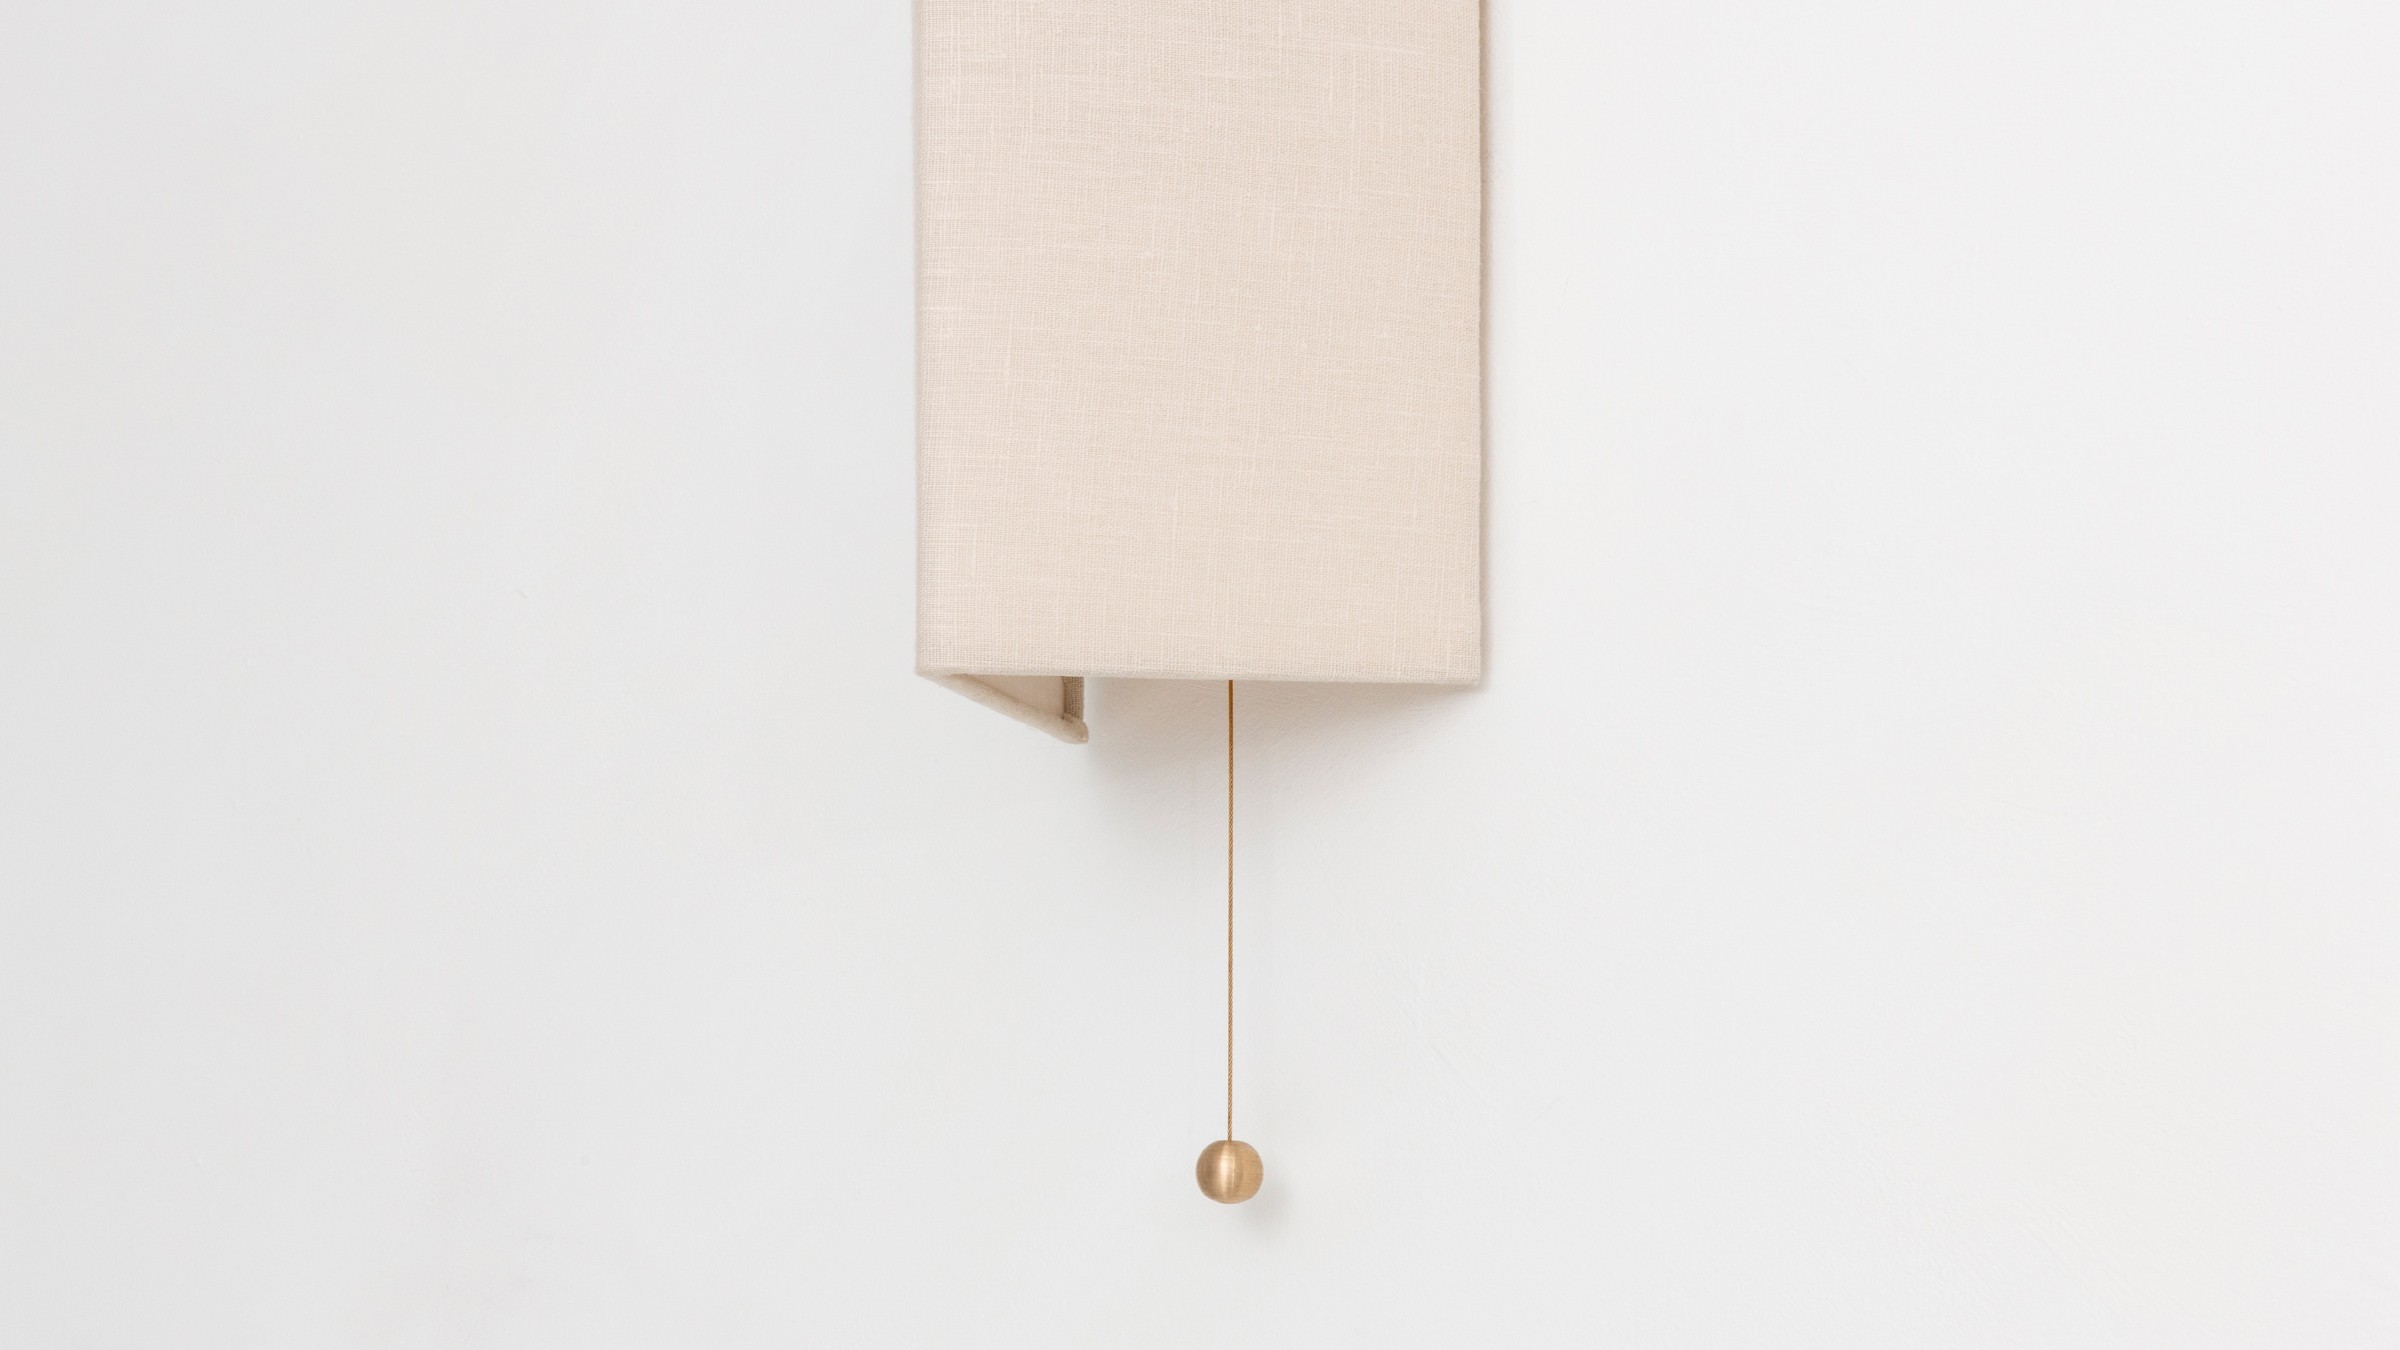 a white wall mounted clock with a beige cover